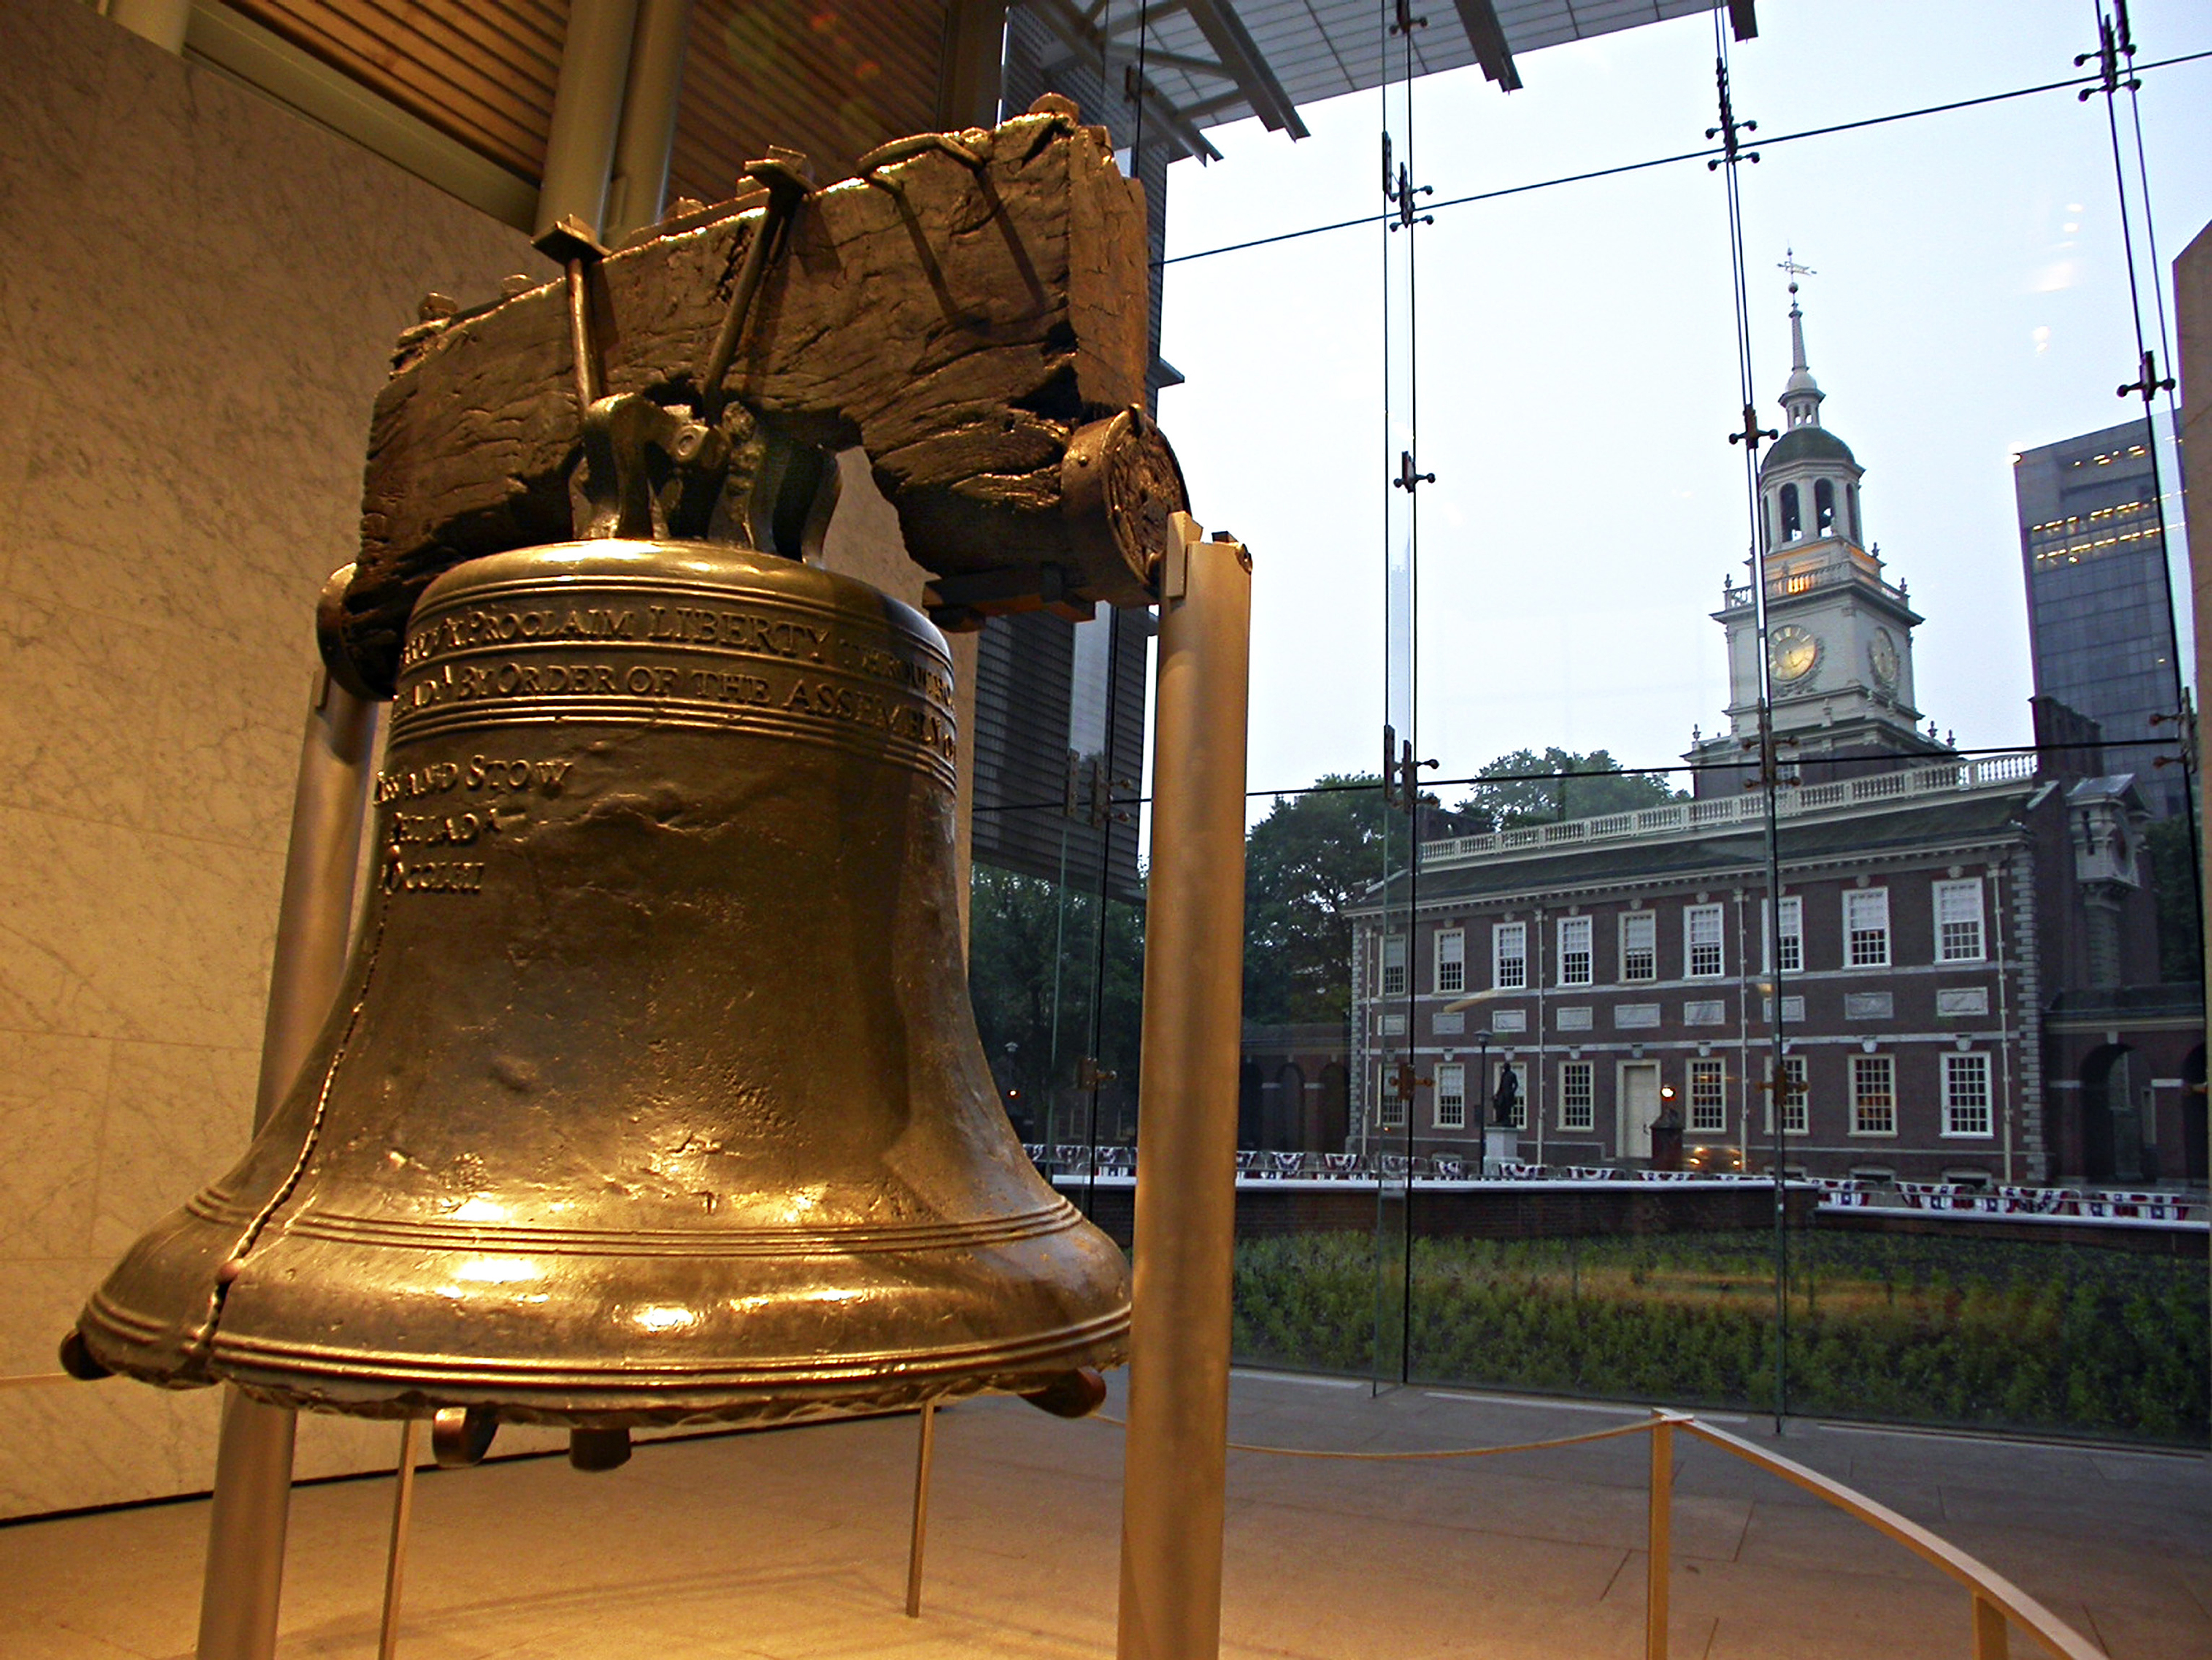 Ben Carson: What You Don't Know About The Liberty Bell | Time